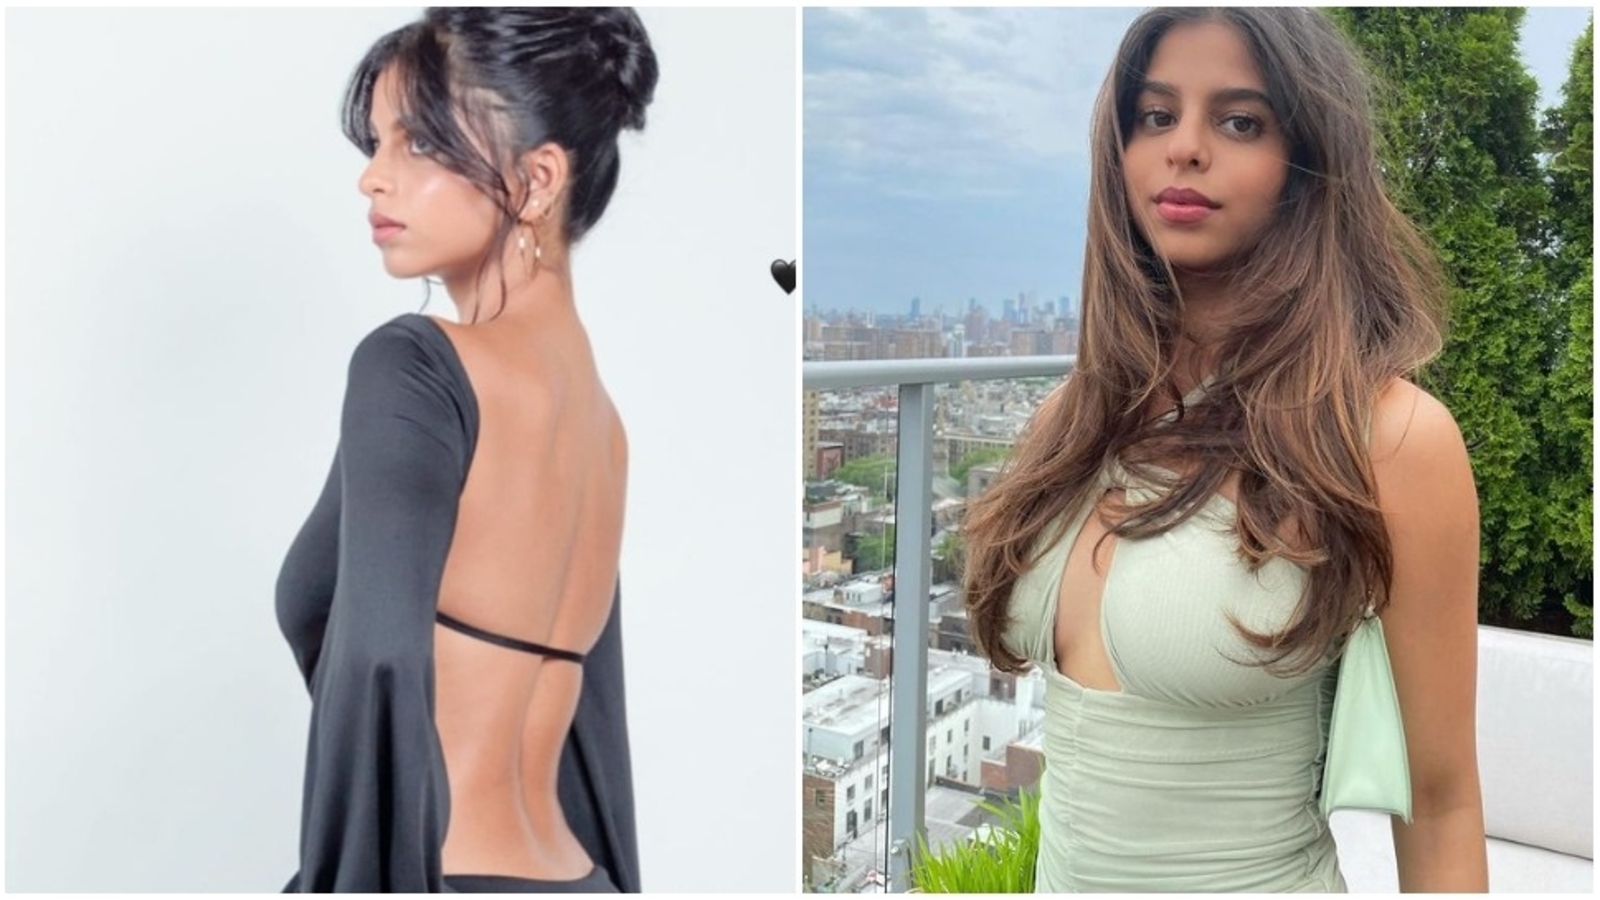 Suhana Khan shares her glamorous look from photoshoot as she poses in backless dress. See post